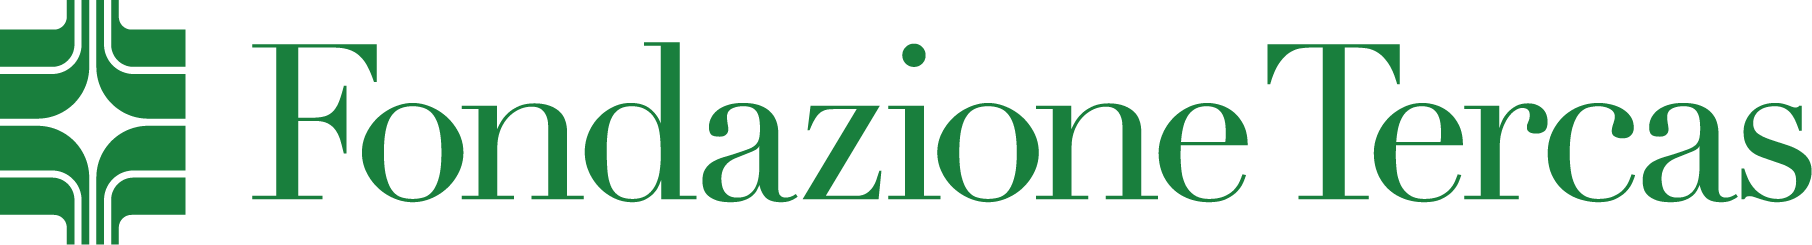 Logo-orizzontale-png